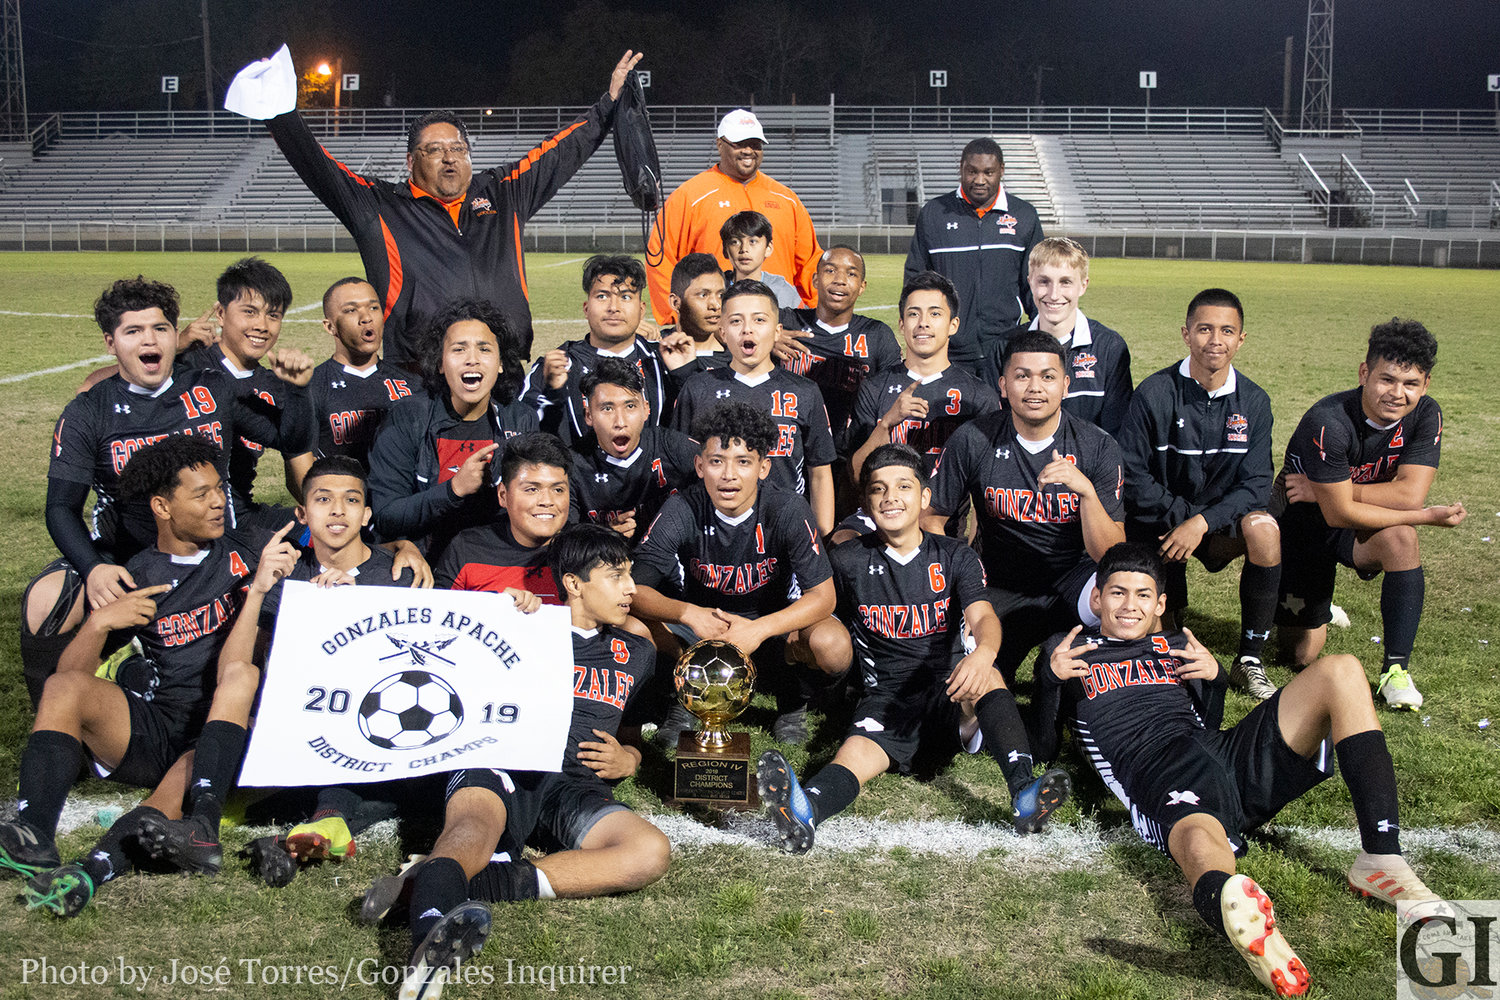 The Gonzales Apaches won all six of the district games this season to become undefeated District 29-4A champions. They outscored their district opponents 31-6.